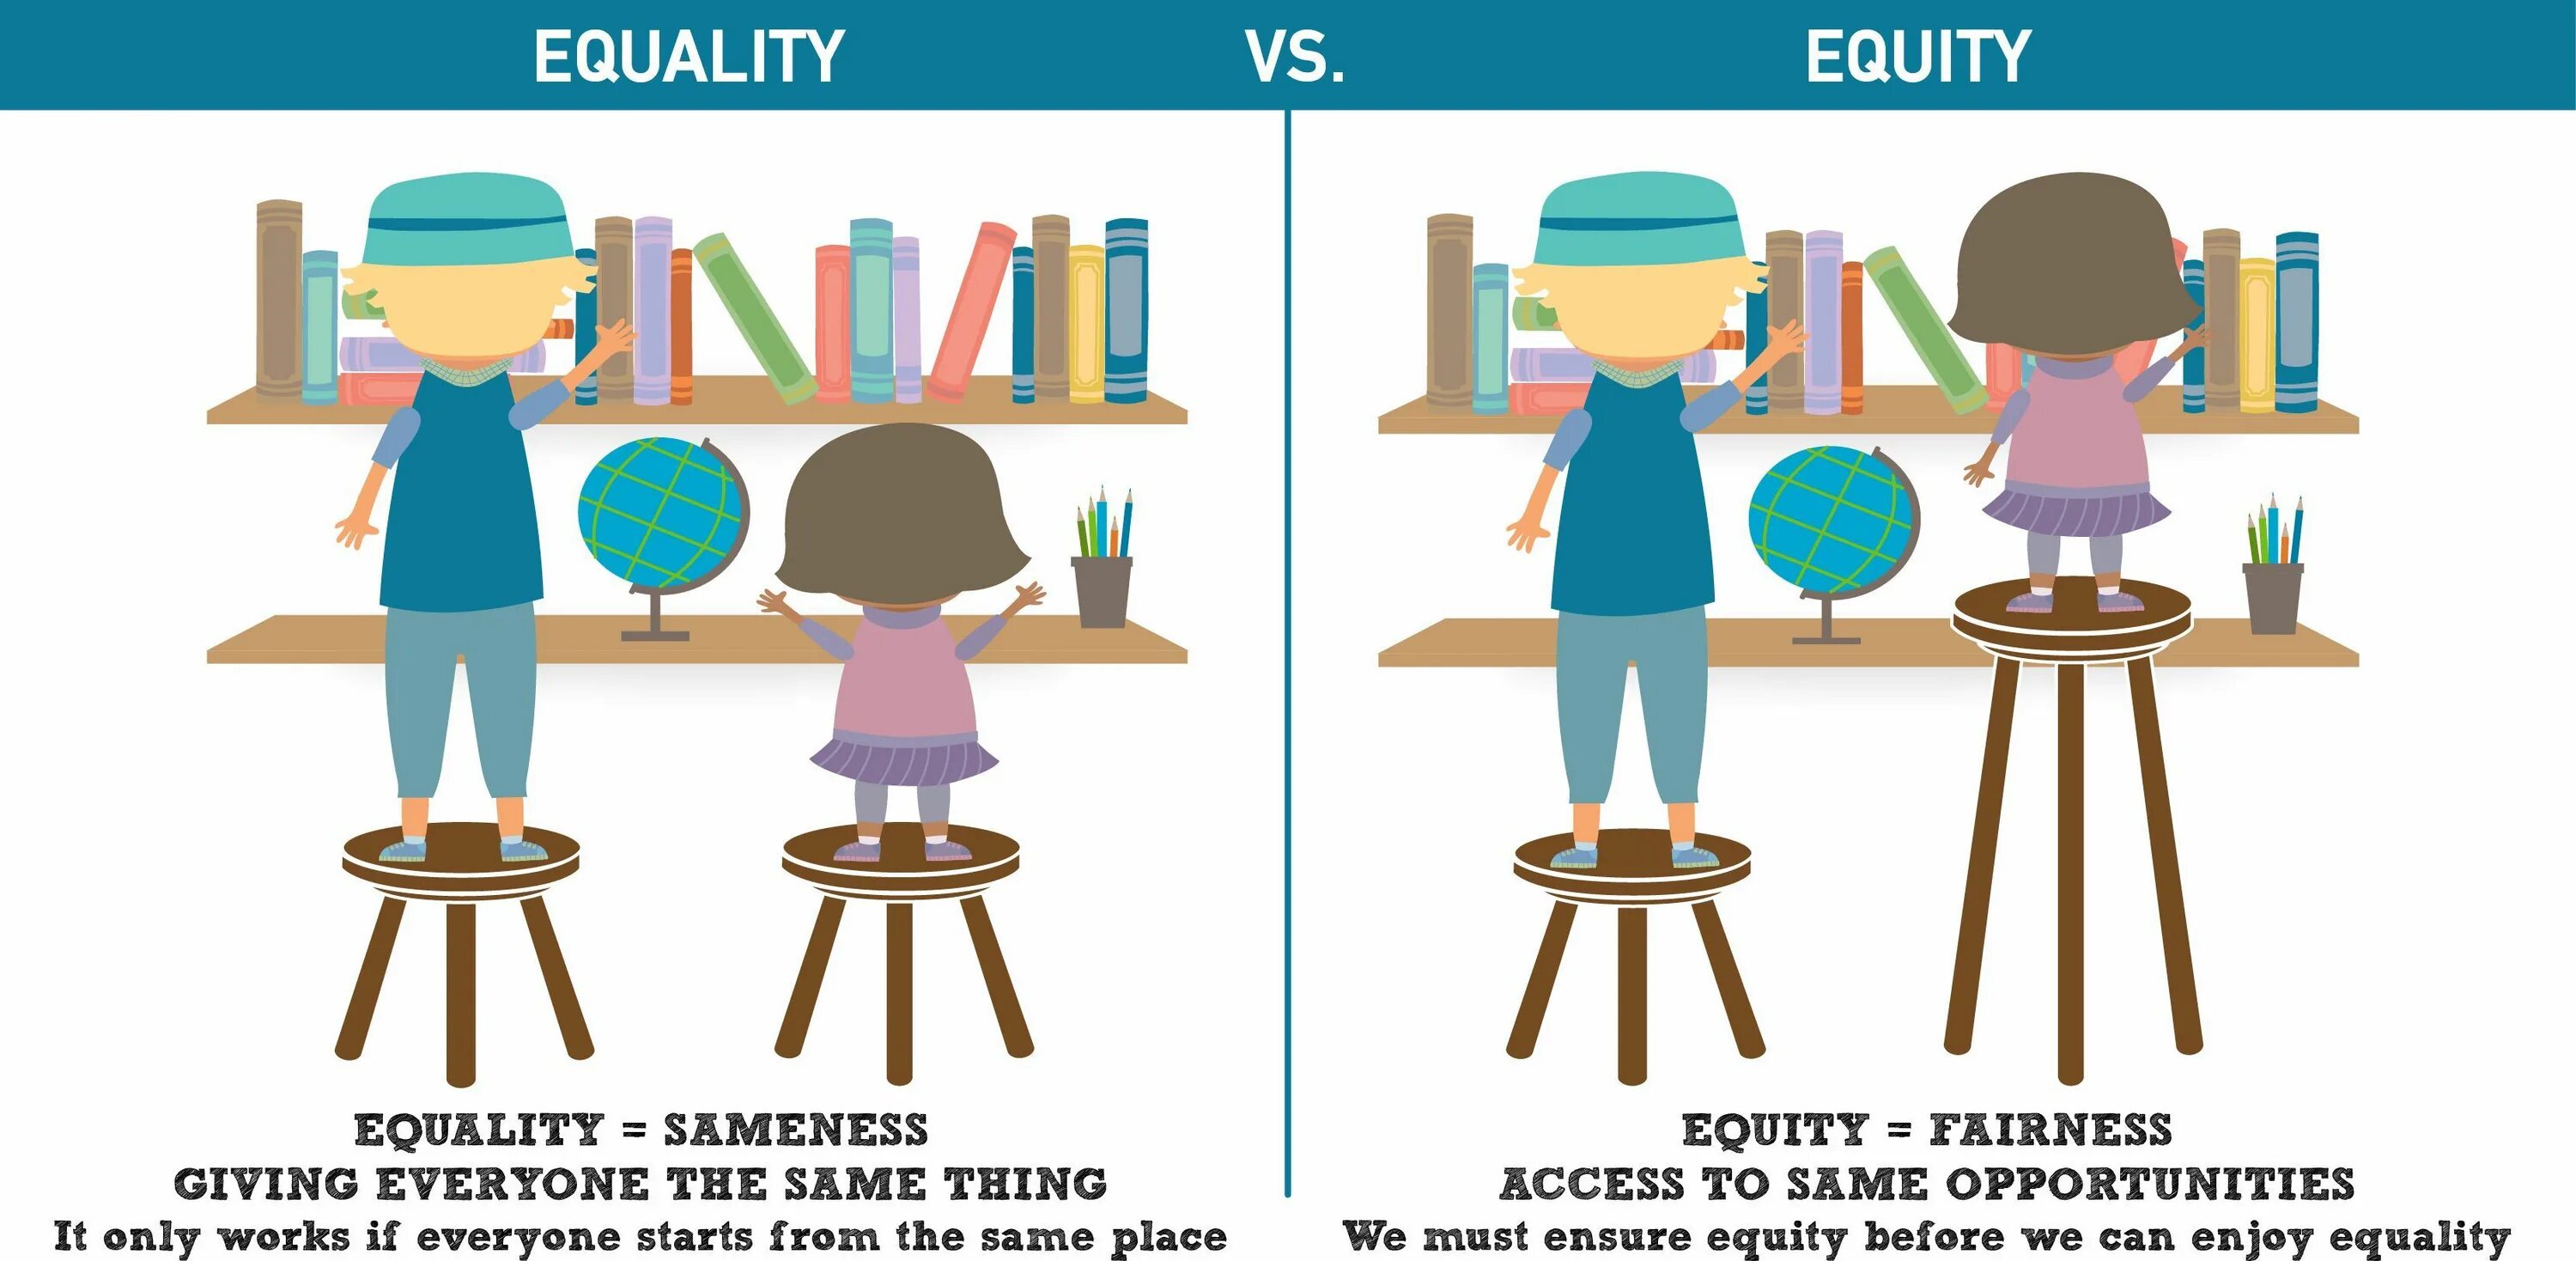 Should equal. Equality Equity. Equality vs Equity. Equity equality разница. Equity equality picture.